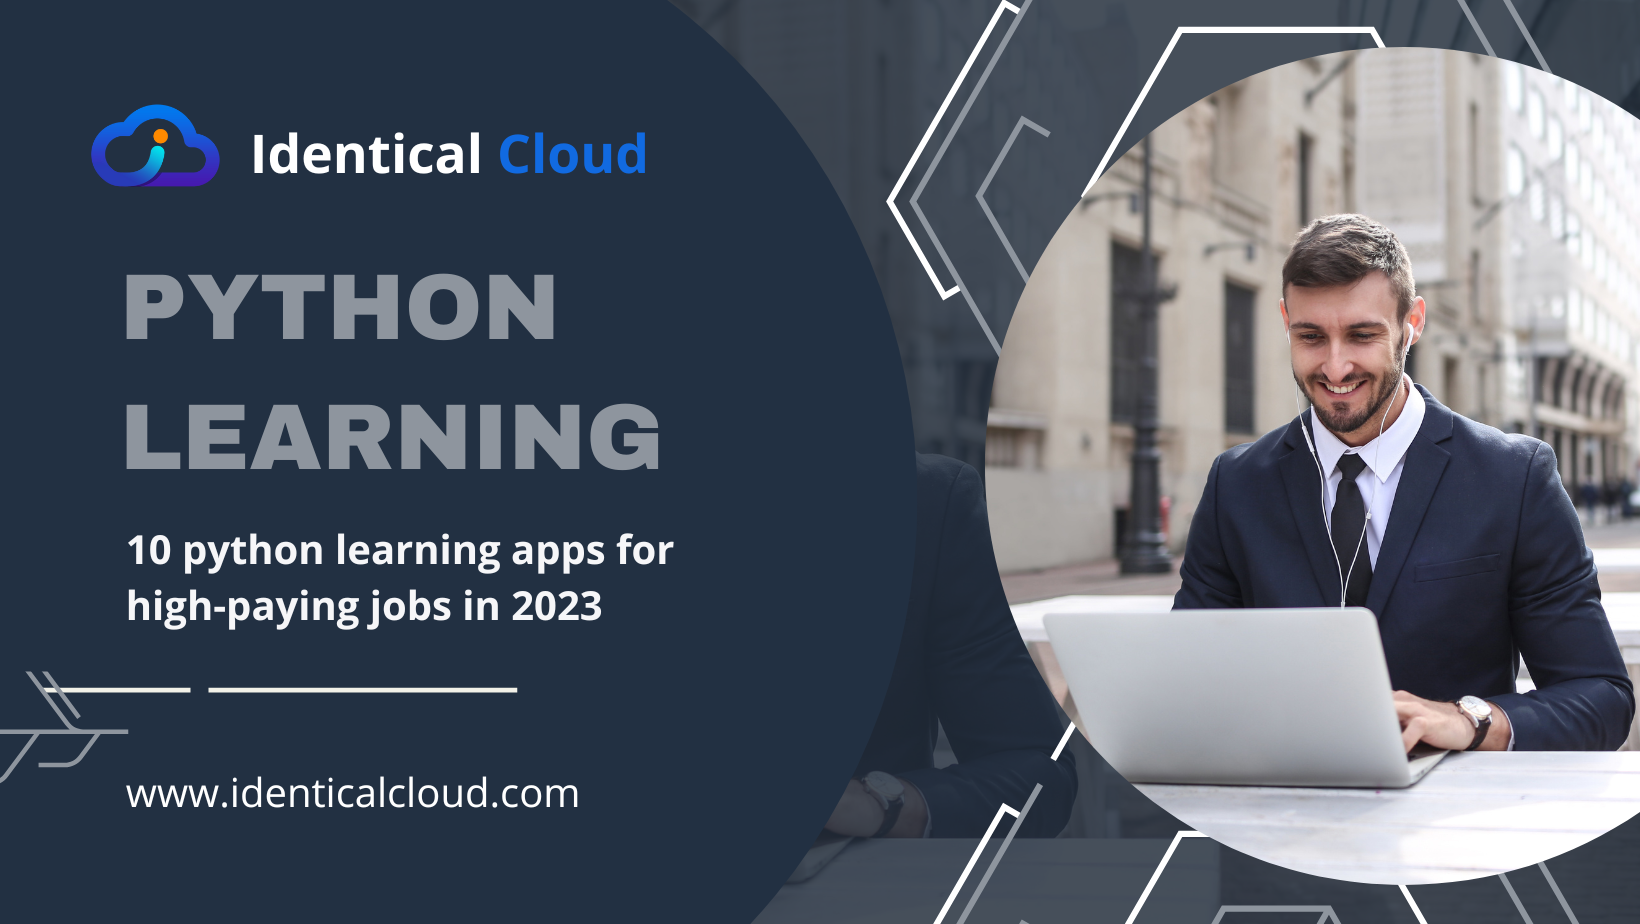 10 python learning apps for high-paying jobs in 2023 - identicalcloud.com